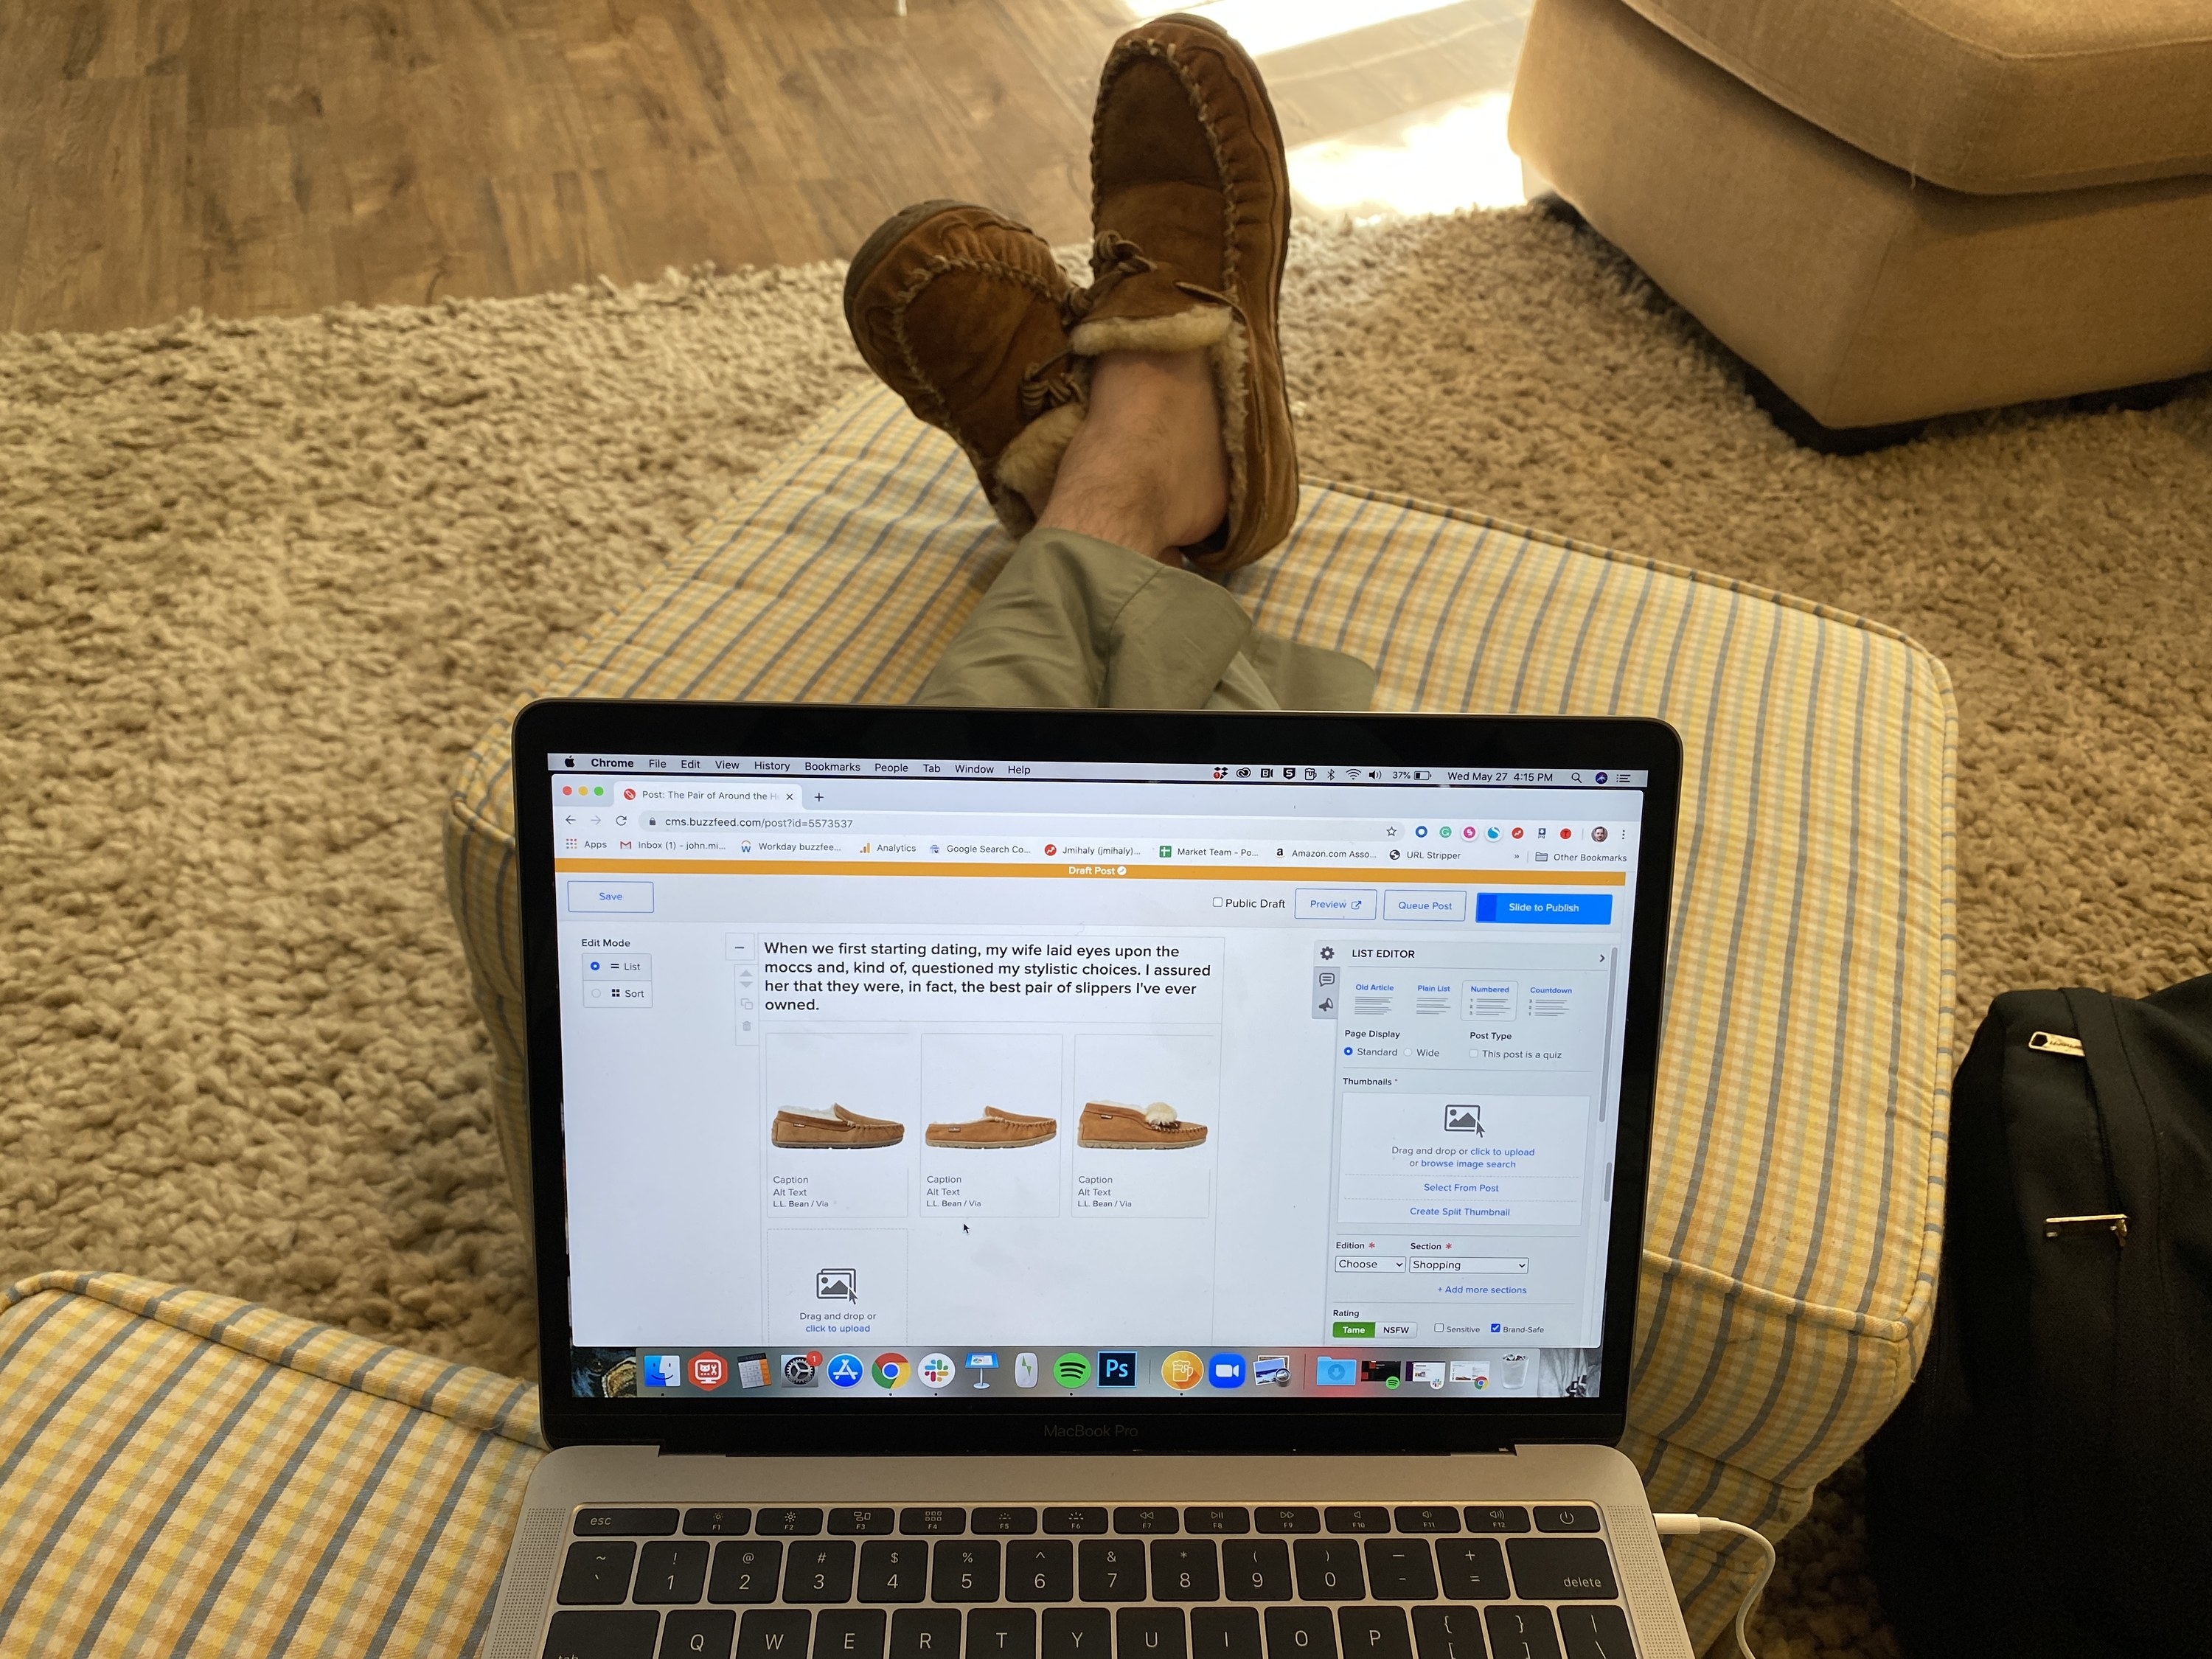 BuzzFeed Editor working on this very story on a laptop while wearing moccasins